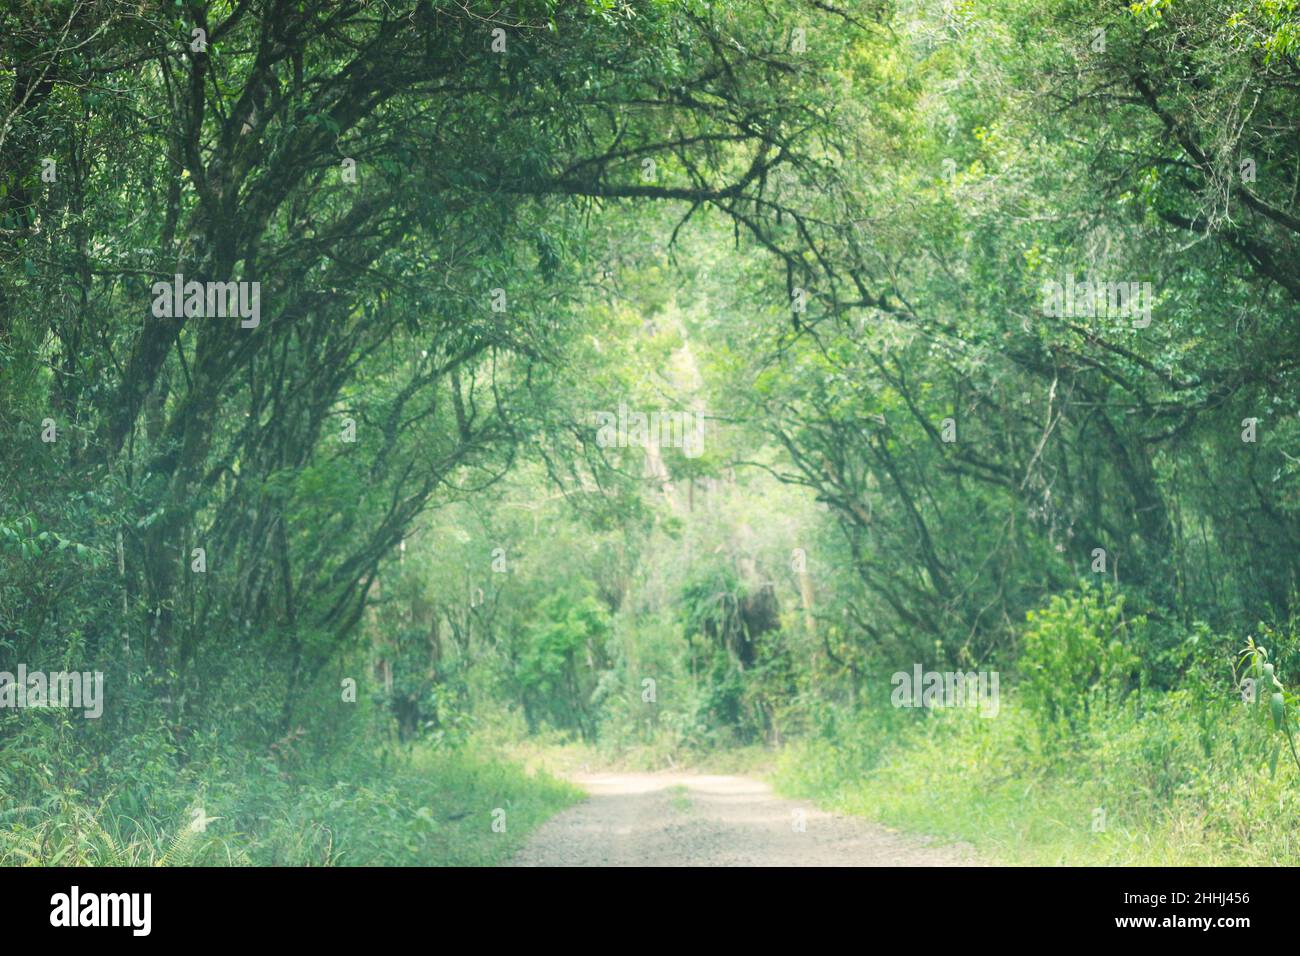 The dirt road, in the rural region, which crosses a green tunnel, in the middle of the Atlantic forest. Stock Photo